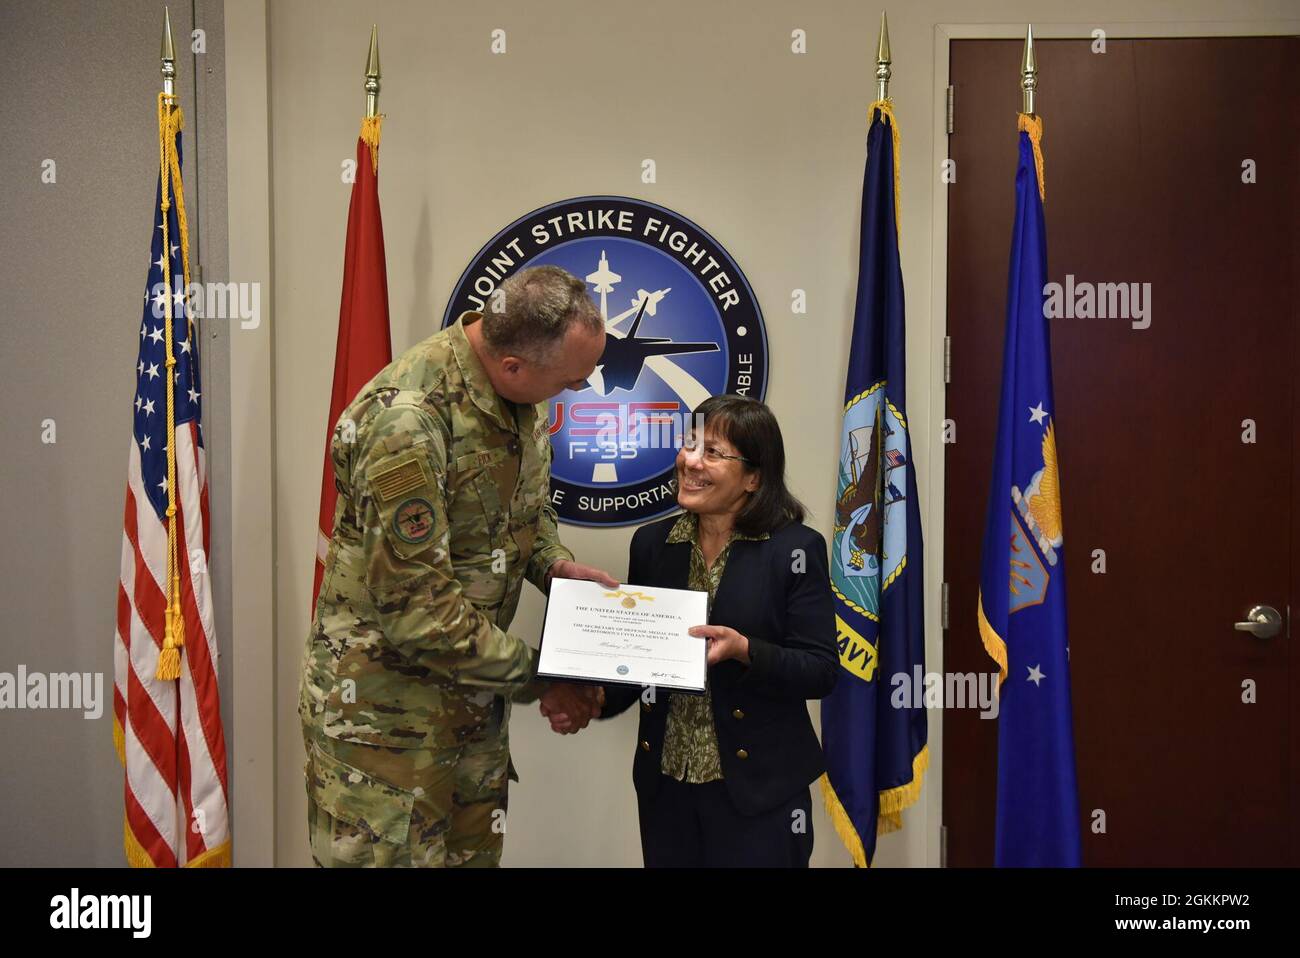 Lt. Gen. Eric Fick, F-35 Joint Program Executive Officer, presents Mahnaz Maung, F-35 Systems Engineering Transformation Lead, with the Secretary of Defense Medal for Meritorious Civilian Service certificate during a semi-virtual all hands ceremony at the program headquarters in Arlington, Va. The F-35 Joint Program Office is the Department of Defense's focal point for the 5th generation strike aircraft for the Navy, Air Force, Marines, and our allies. The F-35 is the premier multi-mission, 5th generation weapon system. Its ability to collect, analyze and share data is a force multiplier that Stock Photo